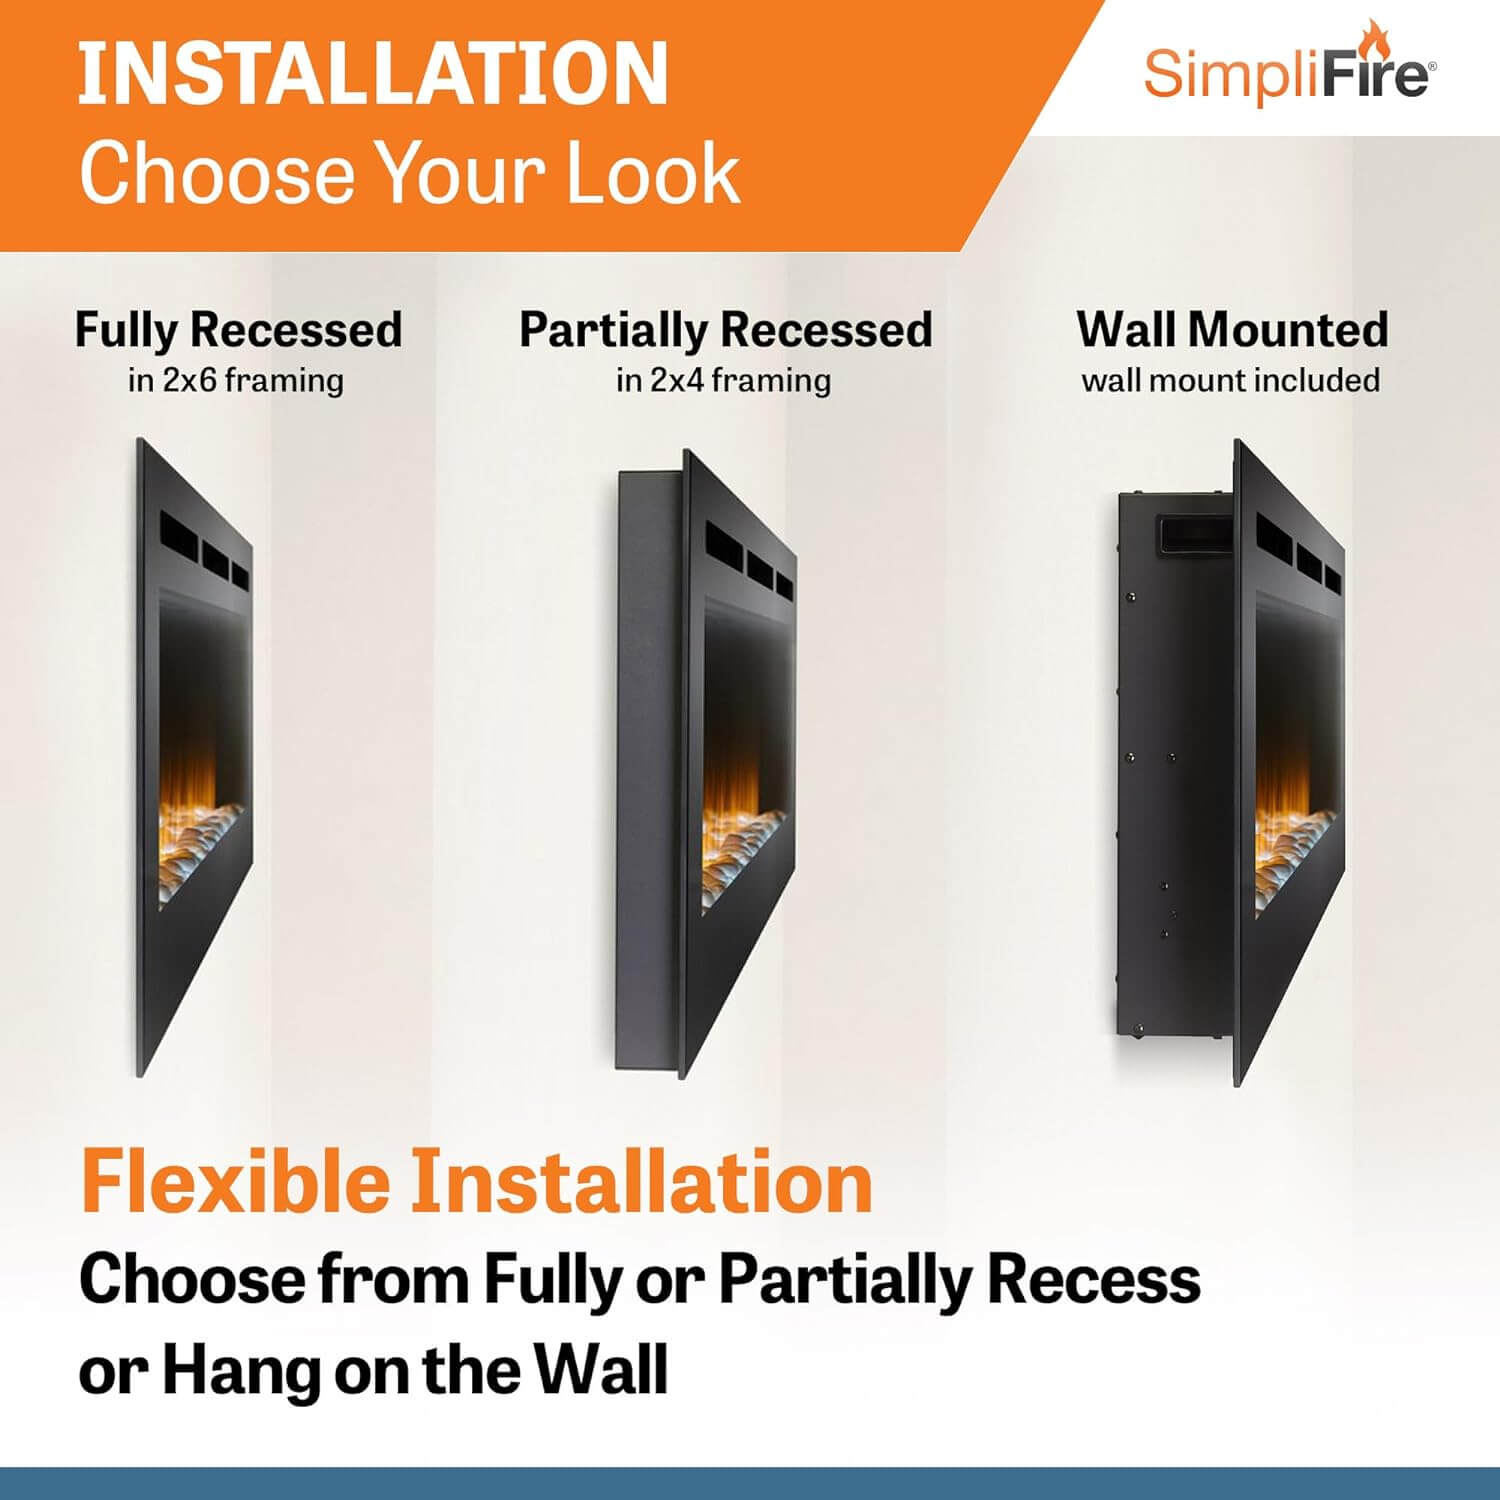 SimpliFire SF-ALL40-BK 40" Allusion Recessed Linear Electric Fireplace